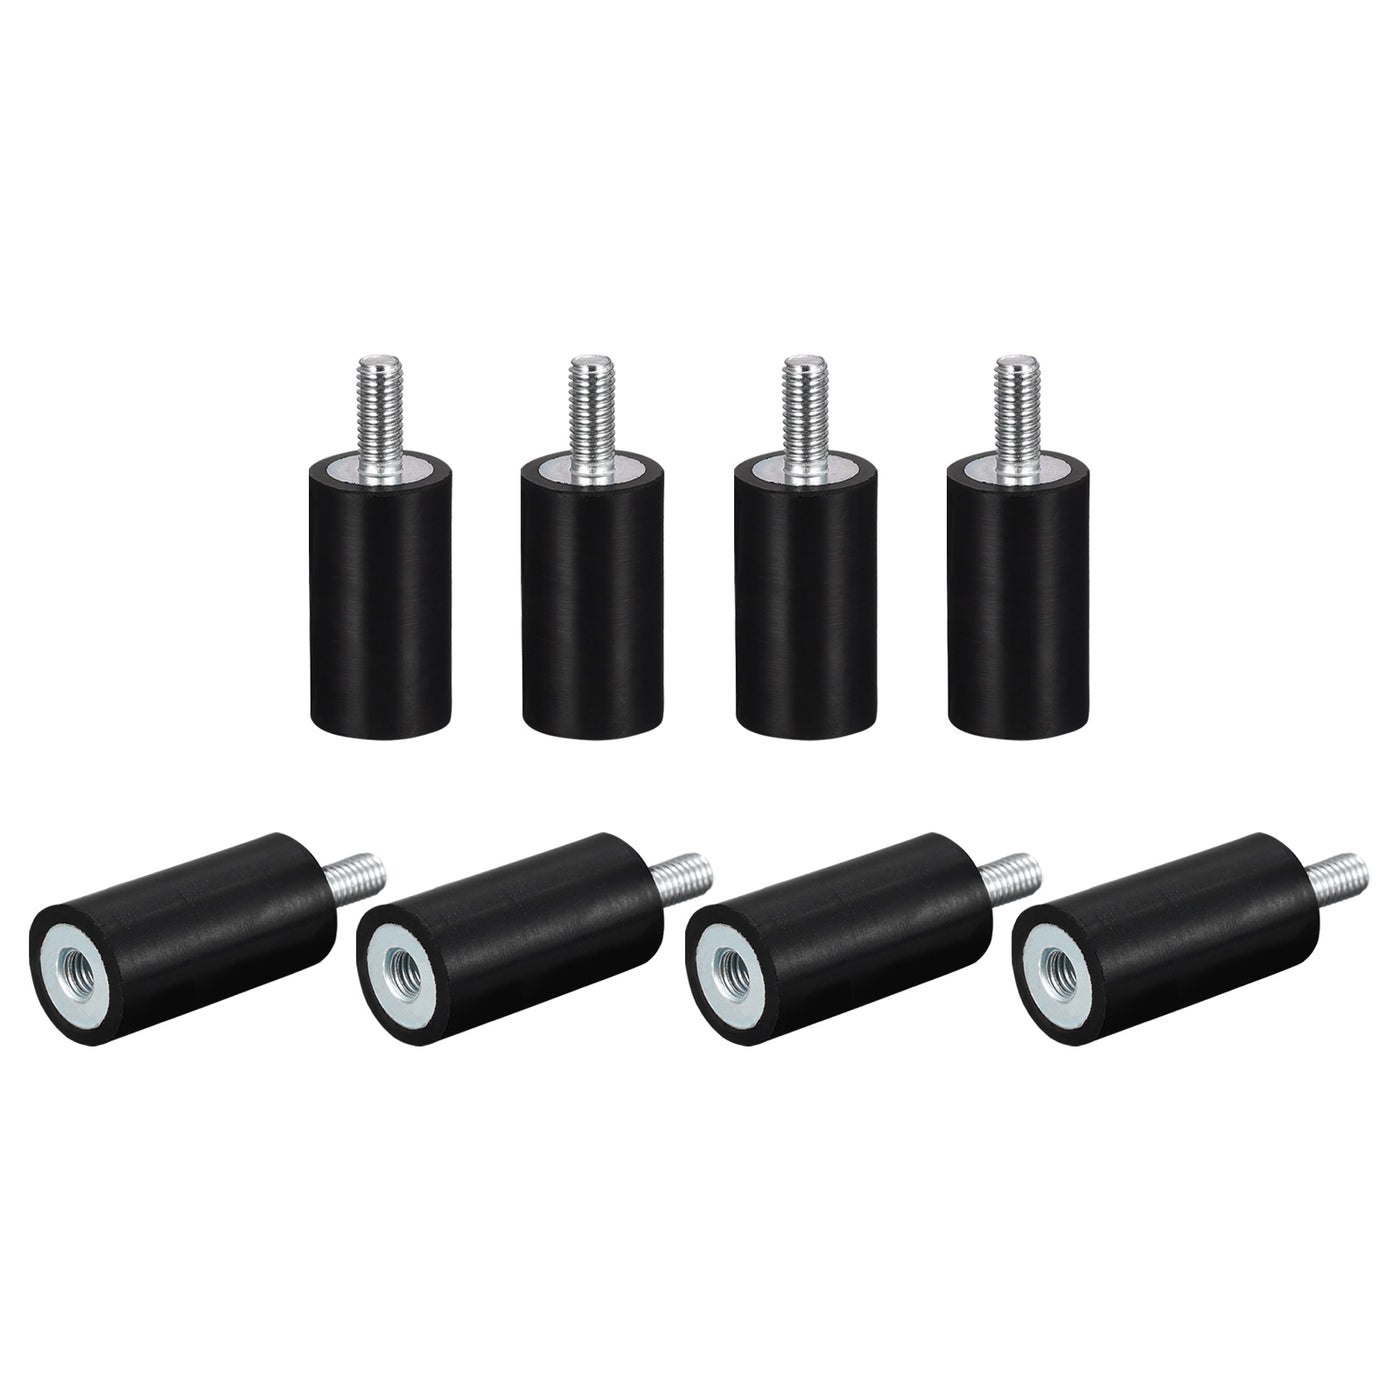 uxcell Uxcell Rubber Mount 8pcs M5 Male/Female Vibration Isolator Shock Absorber, D15mmxH30mm